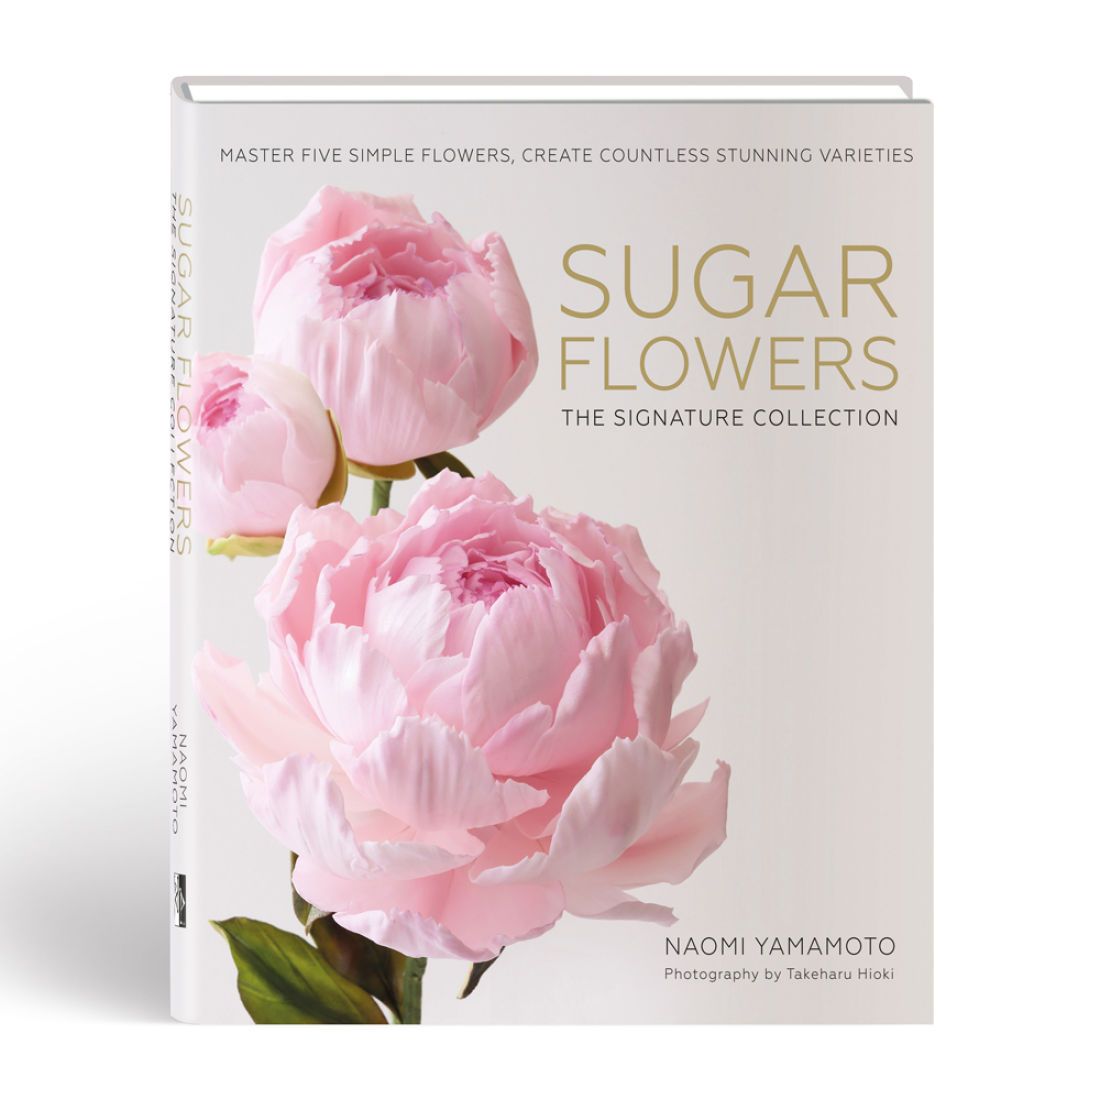 NEW Sugar Flowers - The Signature Collection